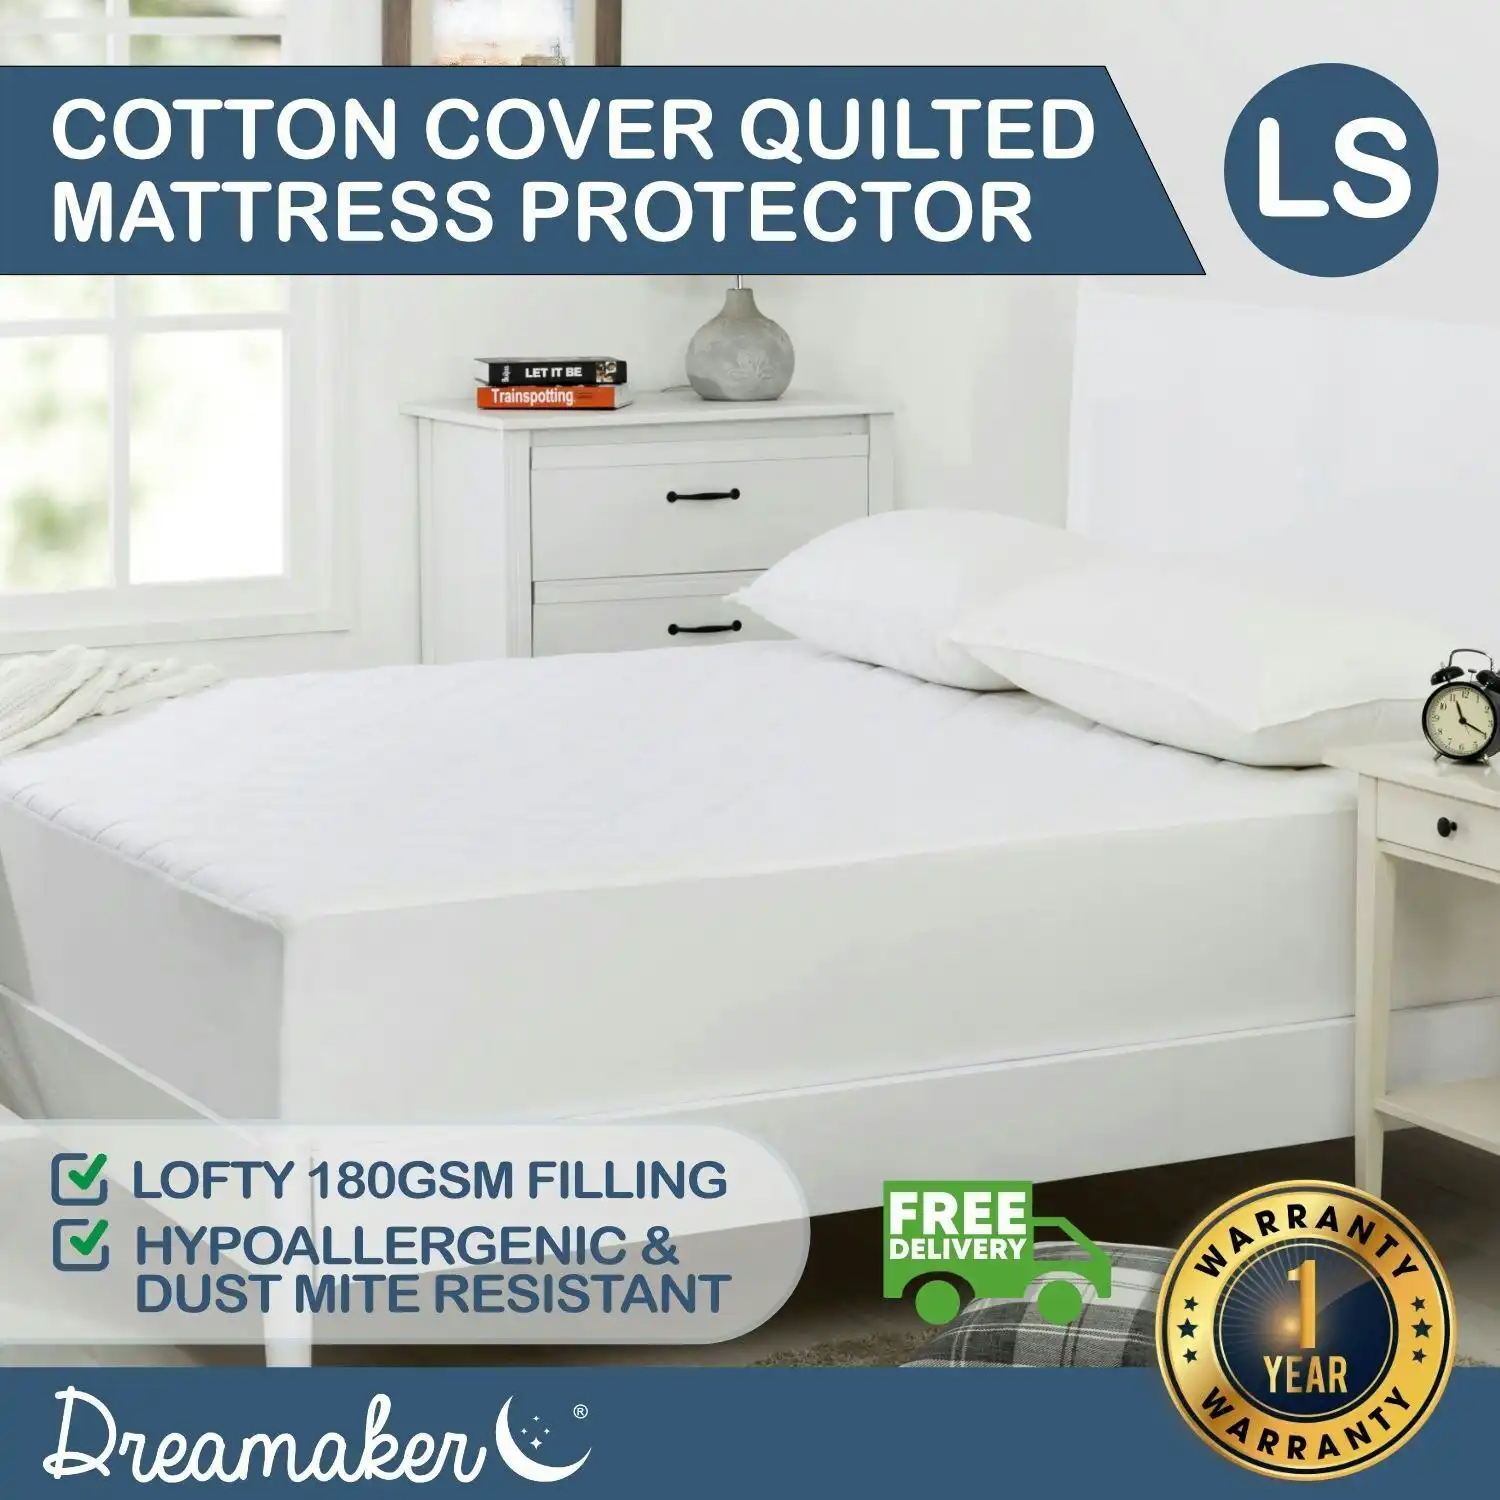 Dreamaker Quilted Cotton Cover Mattress Protector Long Single Bed